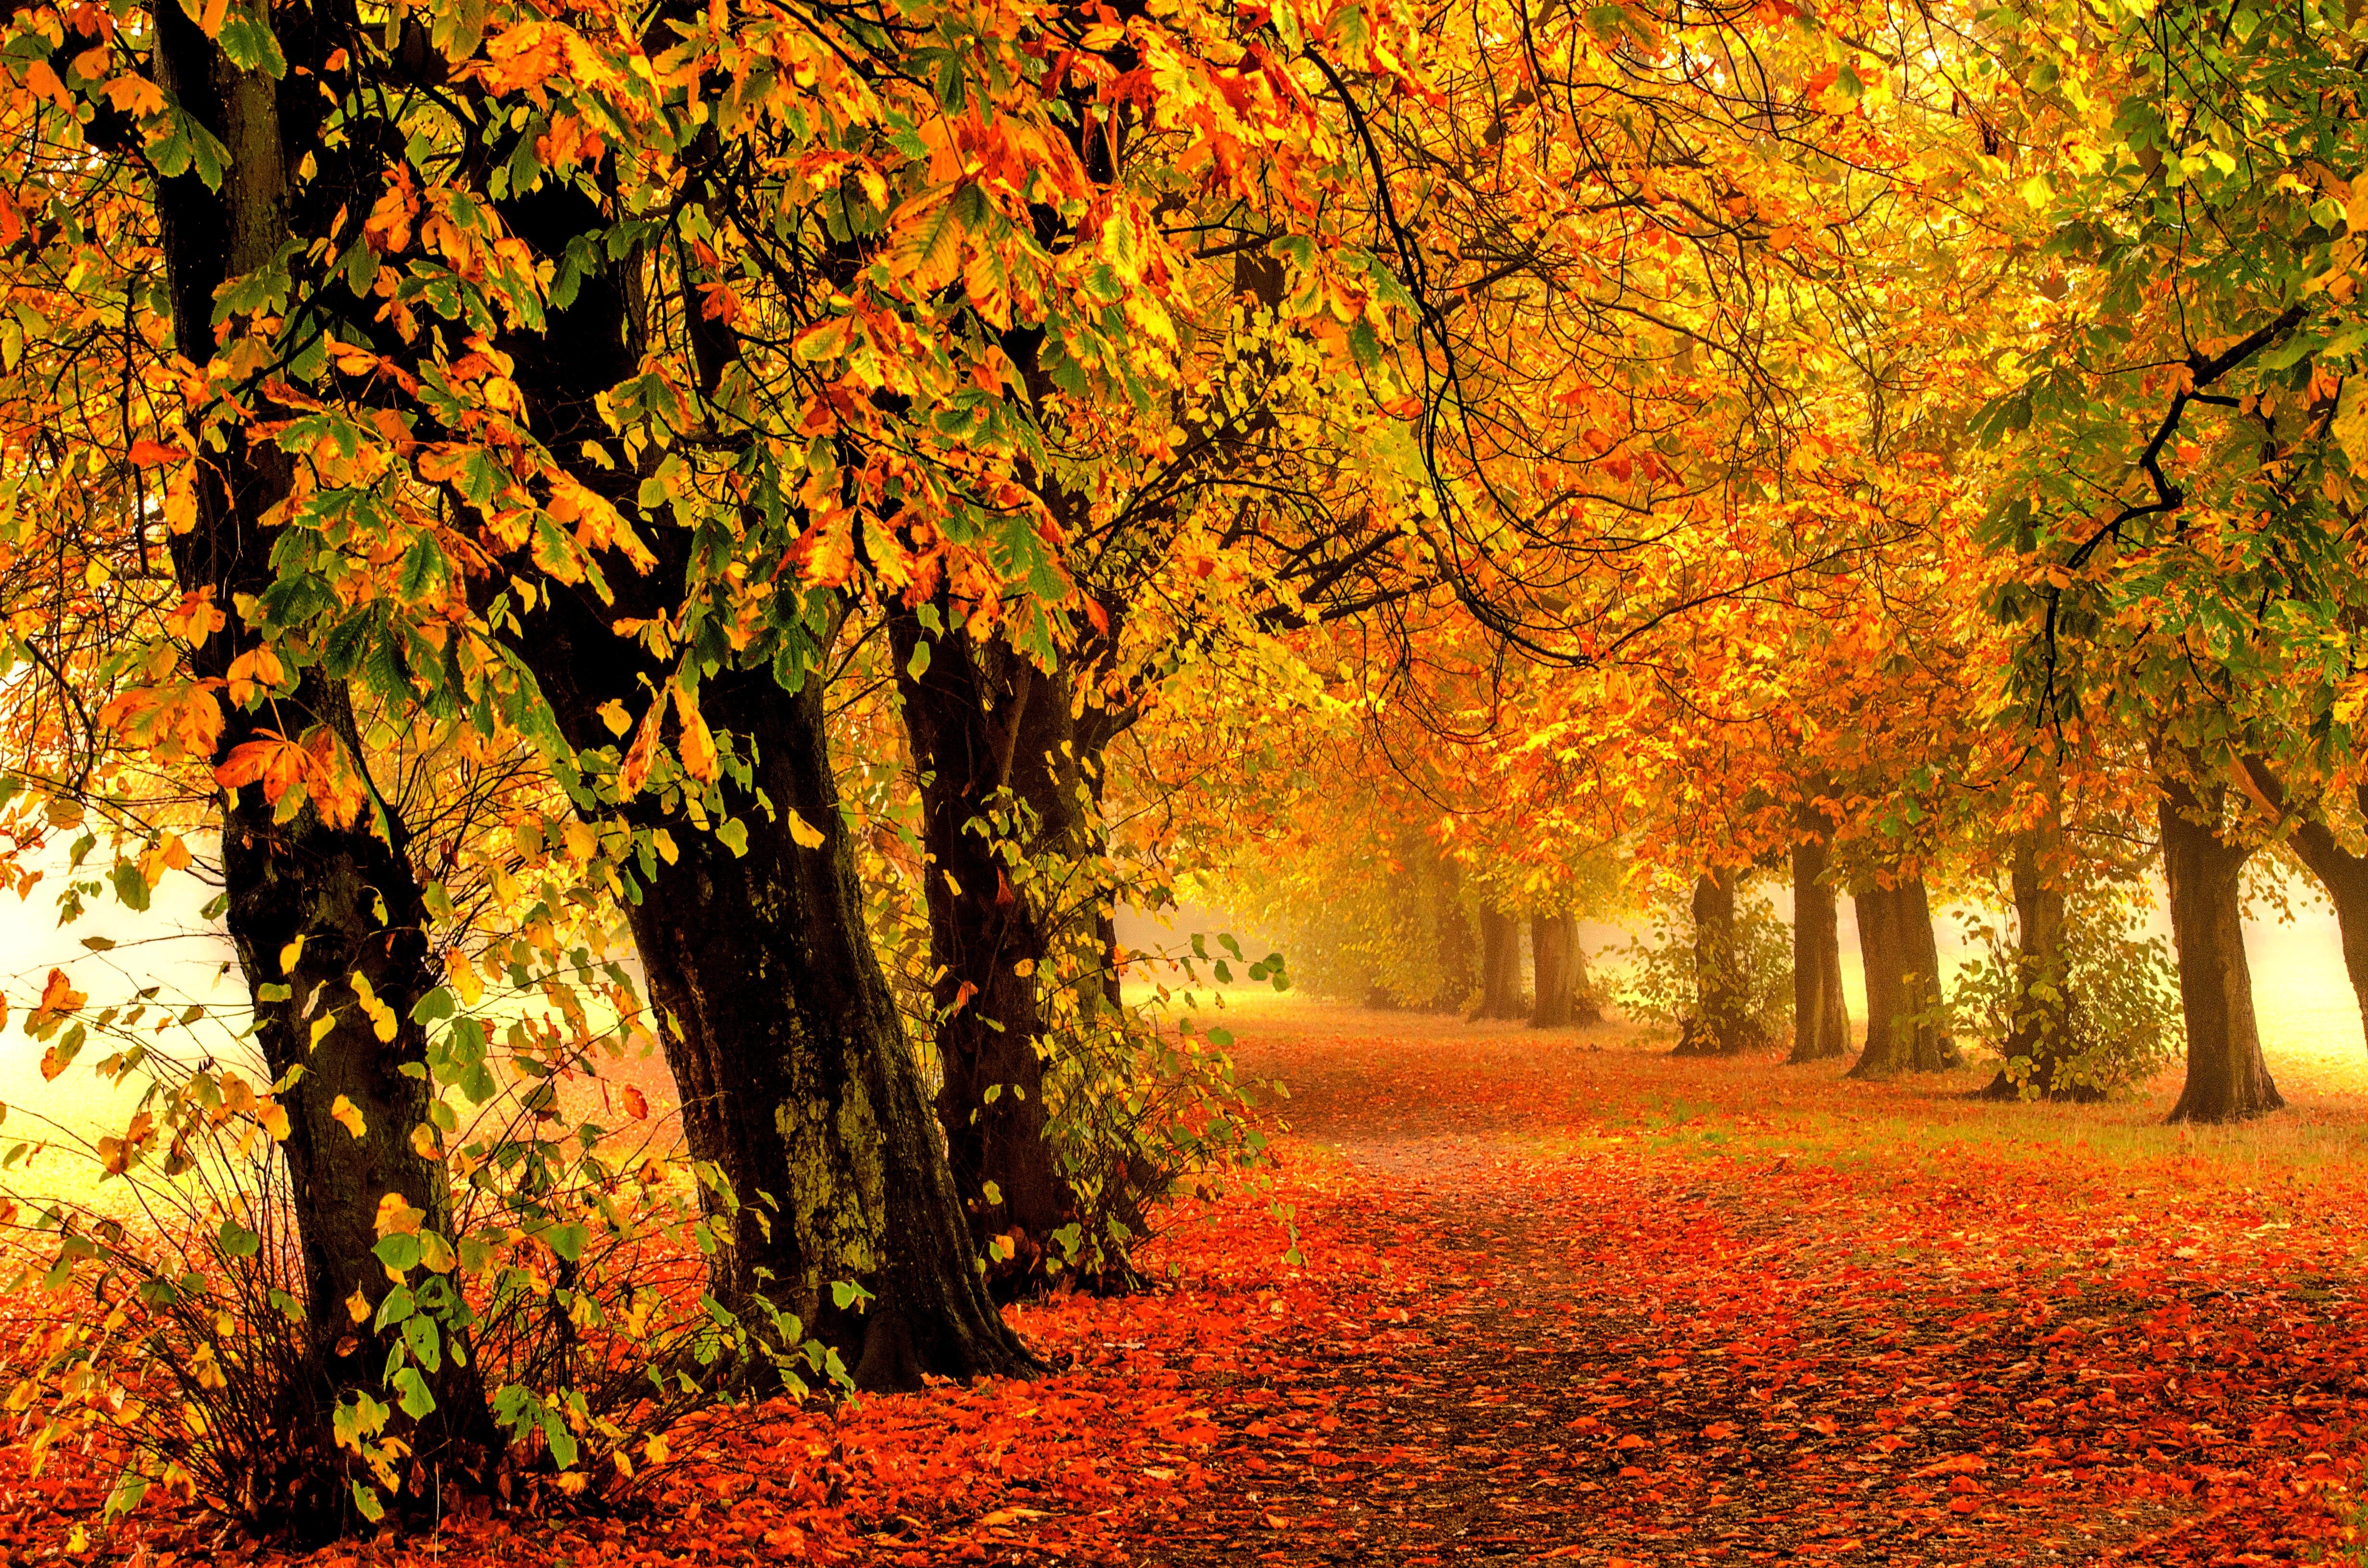 autumn nature wallpaper,tree,natural landscape,nature,people in nature,leaf